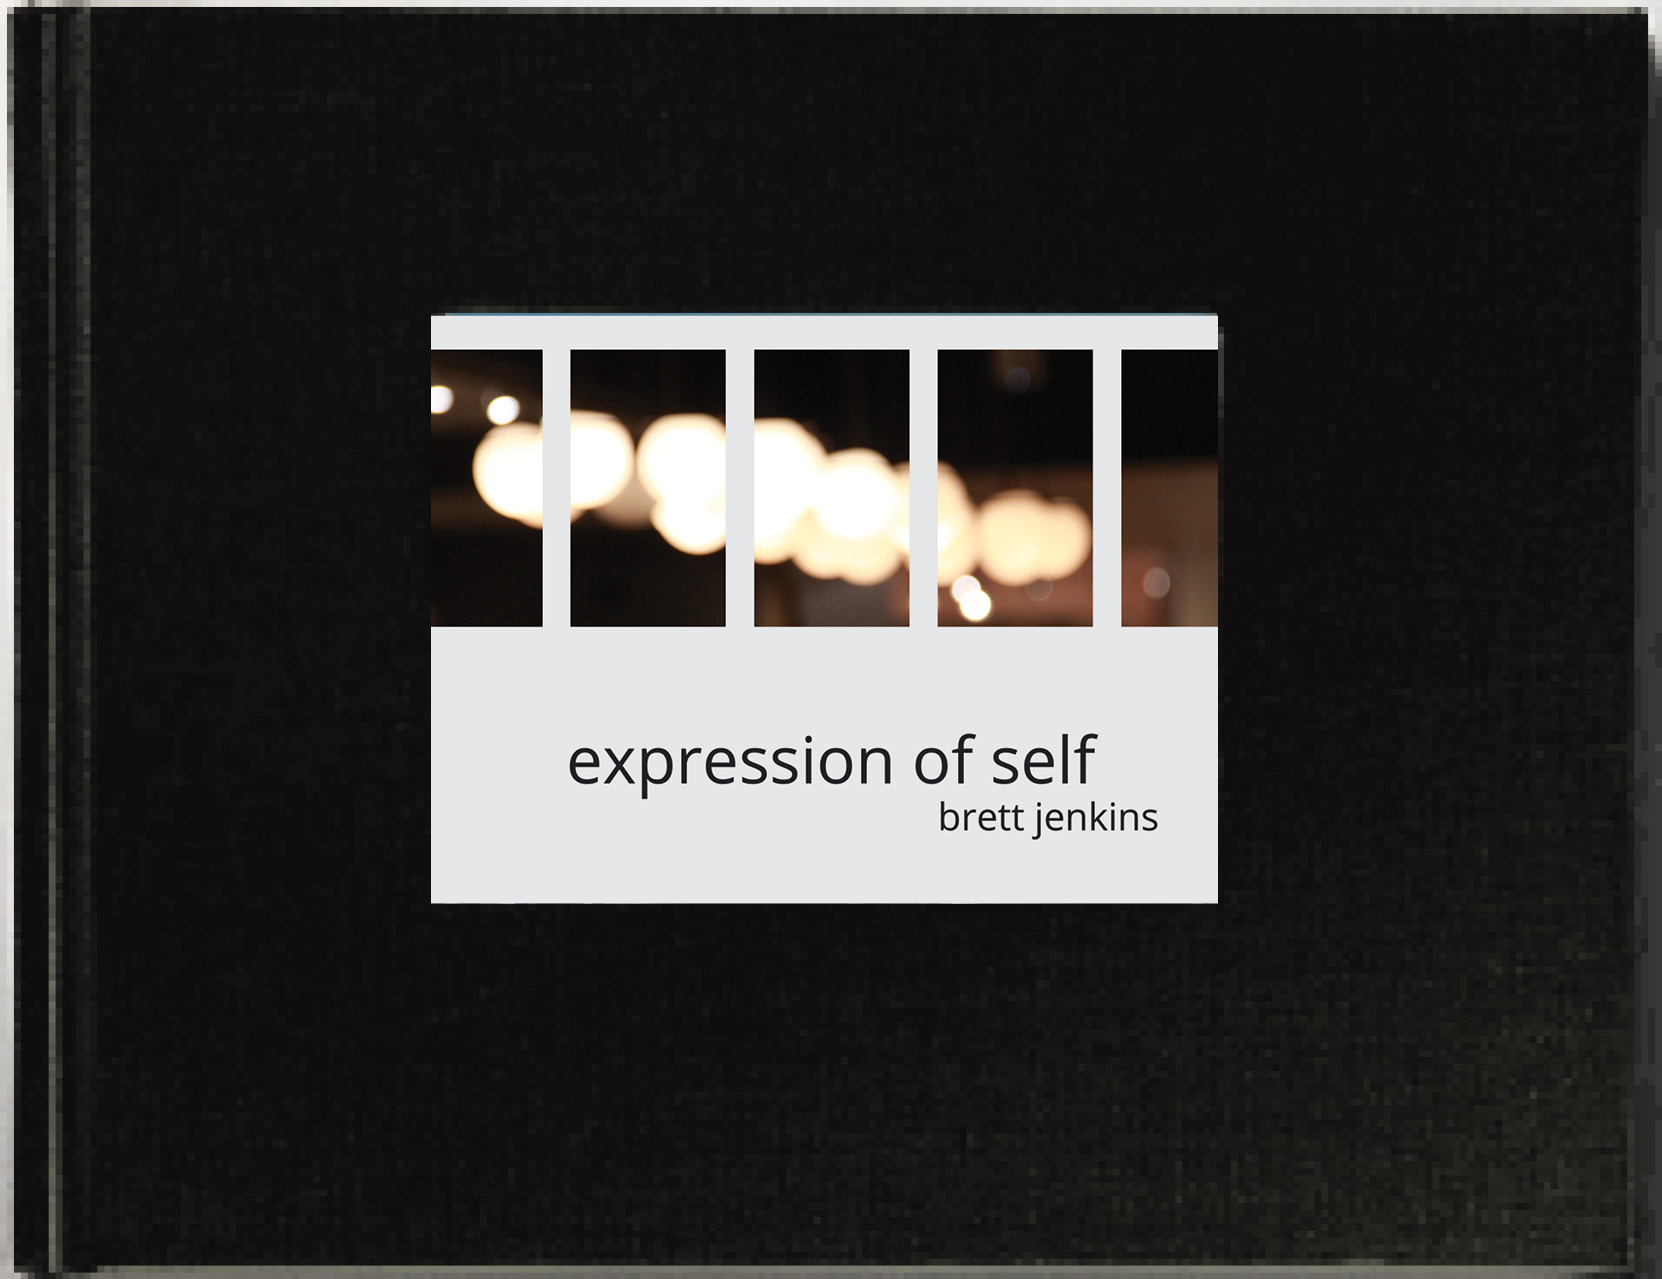 expression of self, a photo book by Brett Jenkins